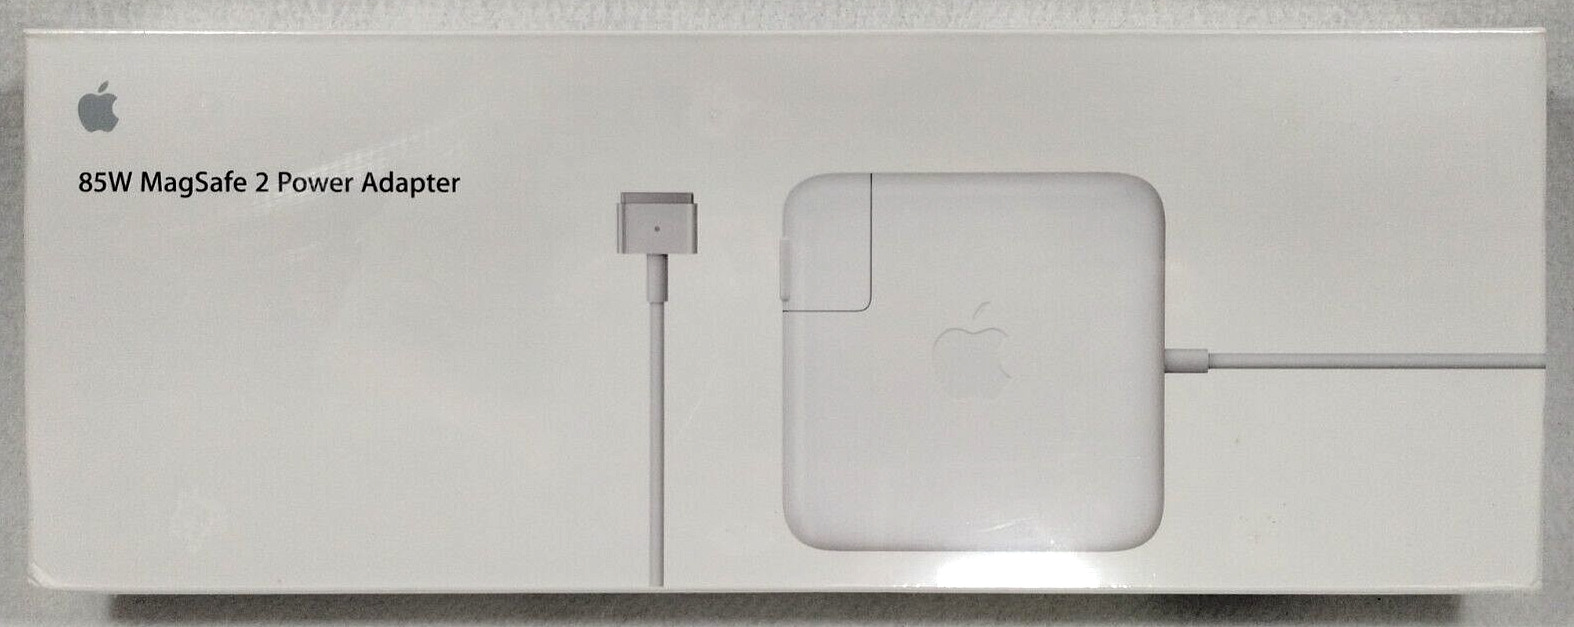 Apple 85W MagSafe 2 Power Adapter (for MacBook Pro with Retina display) New